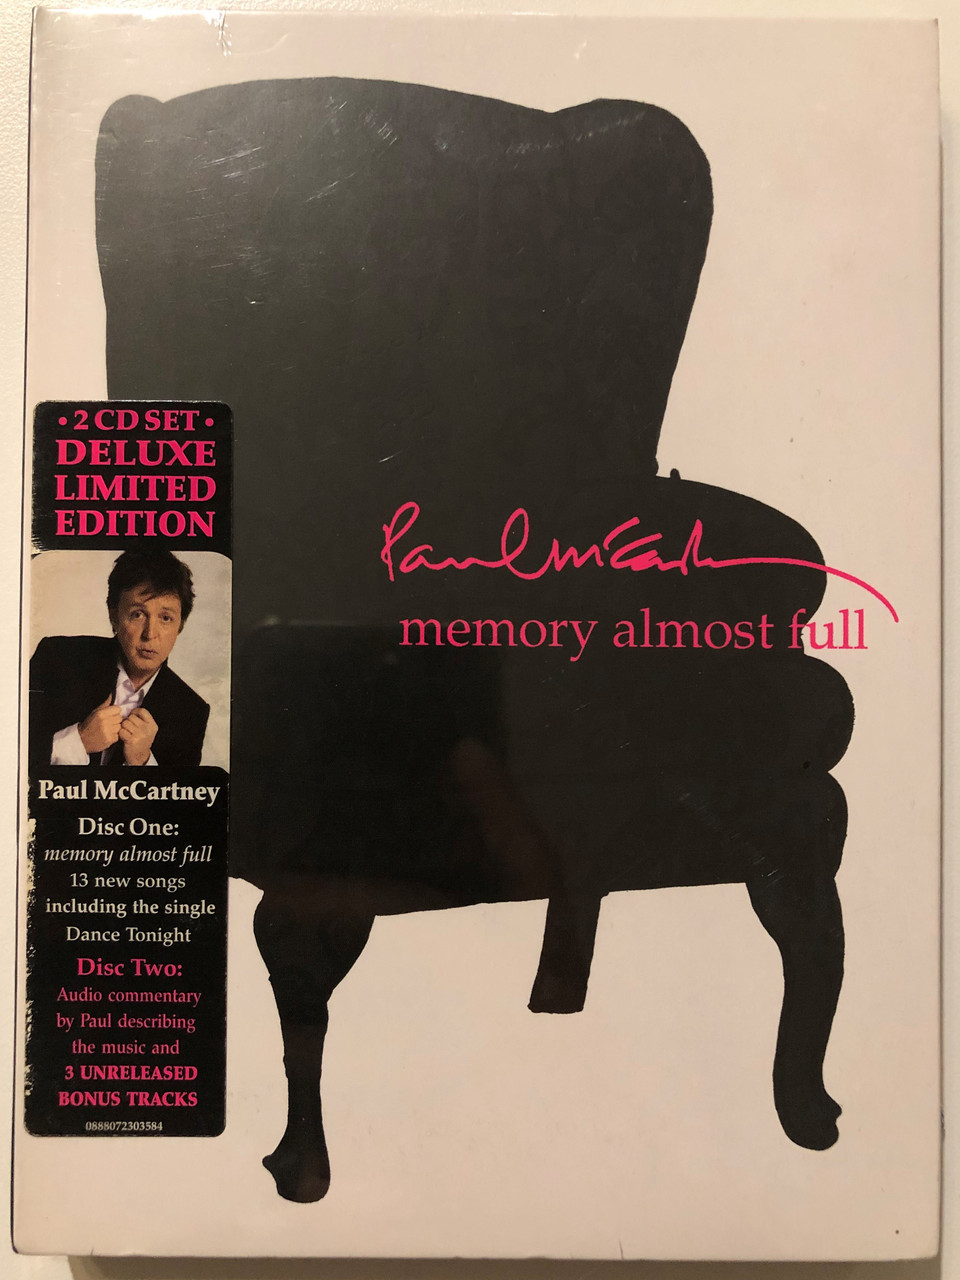 Memory_Almost_Full_Deluxe_Limited_Edition_McCartney_Paul_All_tracks_published_by_MPL_Communications_Ltd._UNIVERSAL_MUSIC_GROUP_DVD_2__53728.1692014221.1280.1280.JPG (960×1280)